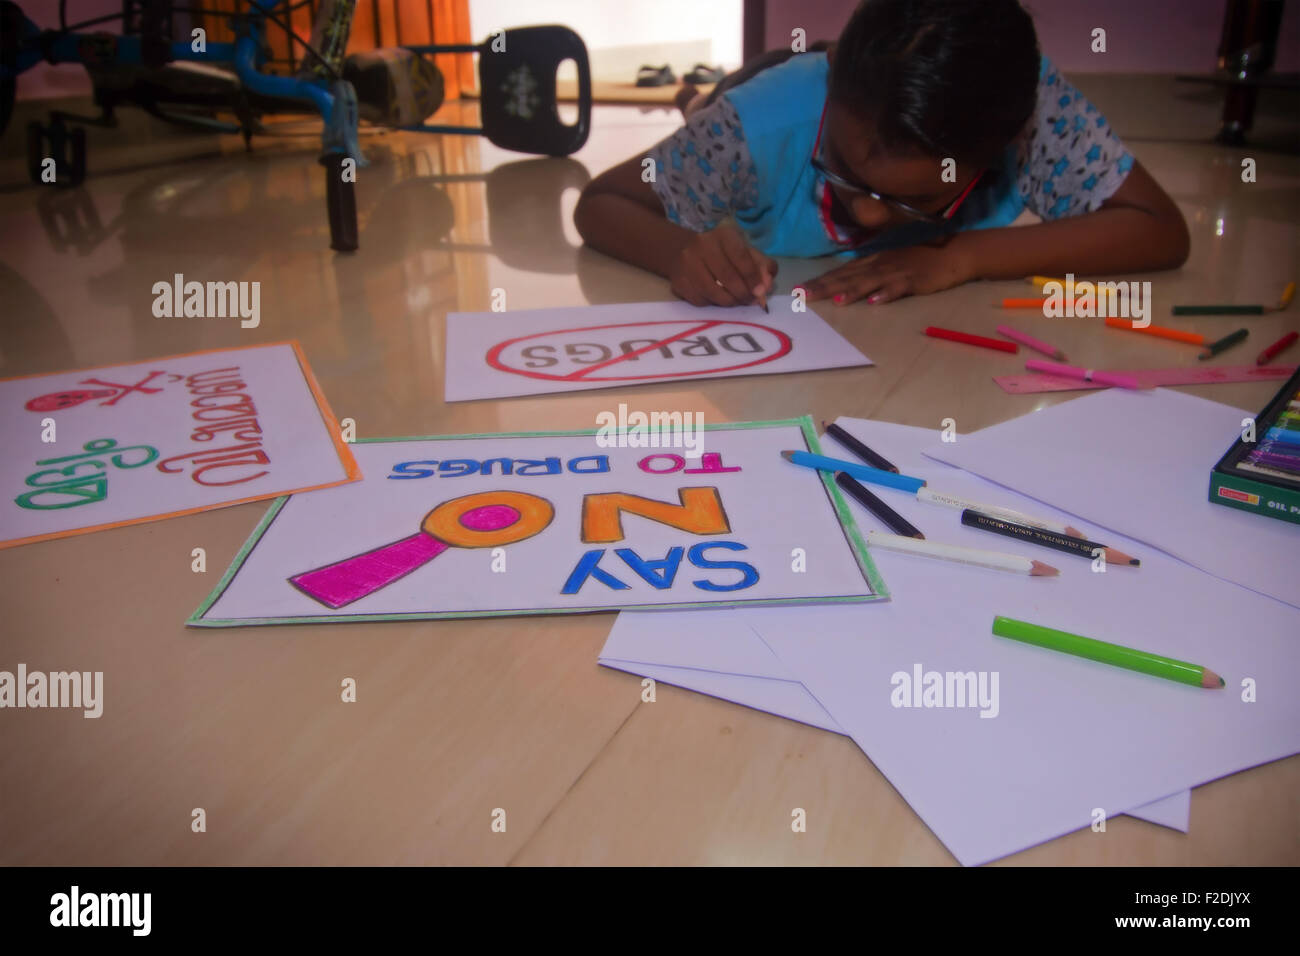 Child making posters against drugs Stock Photo